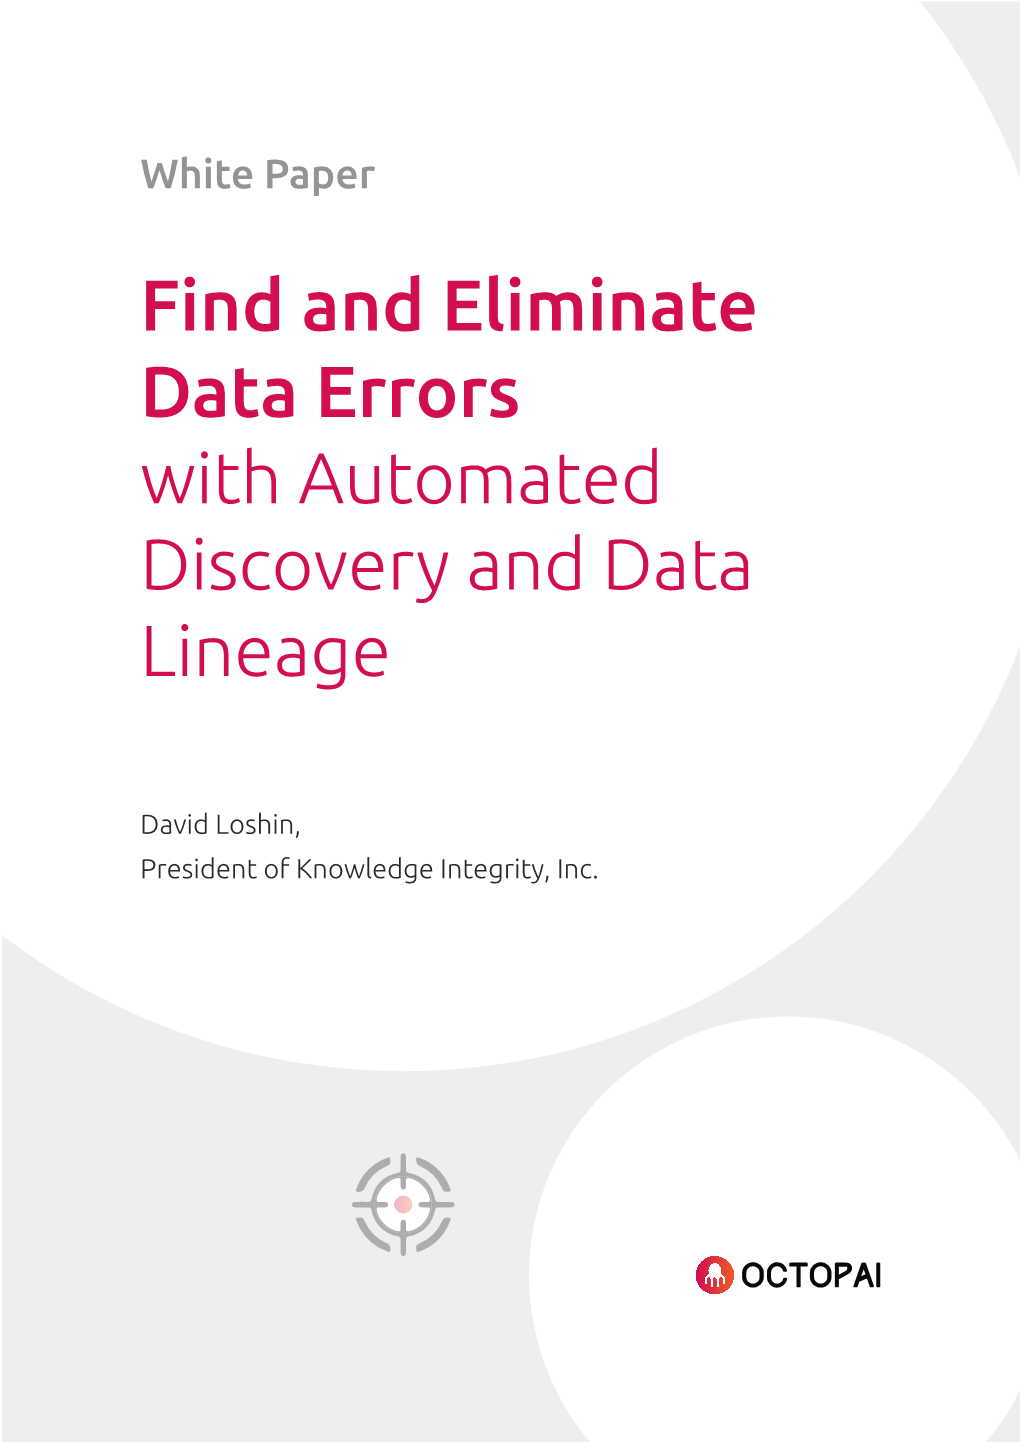 Find and Eliminate Data Errors with Automated Discovery and Data Lineage